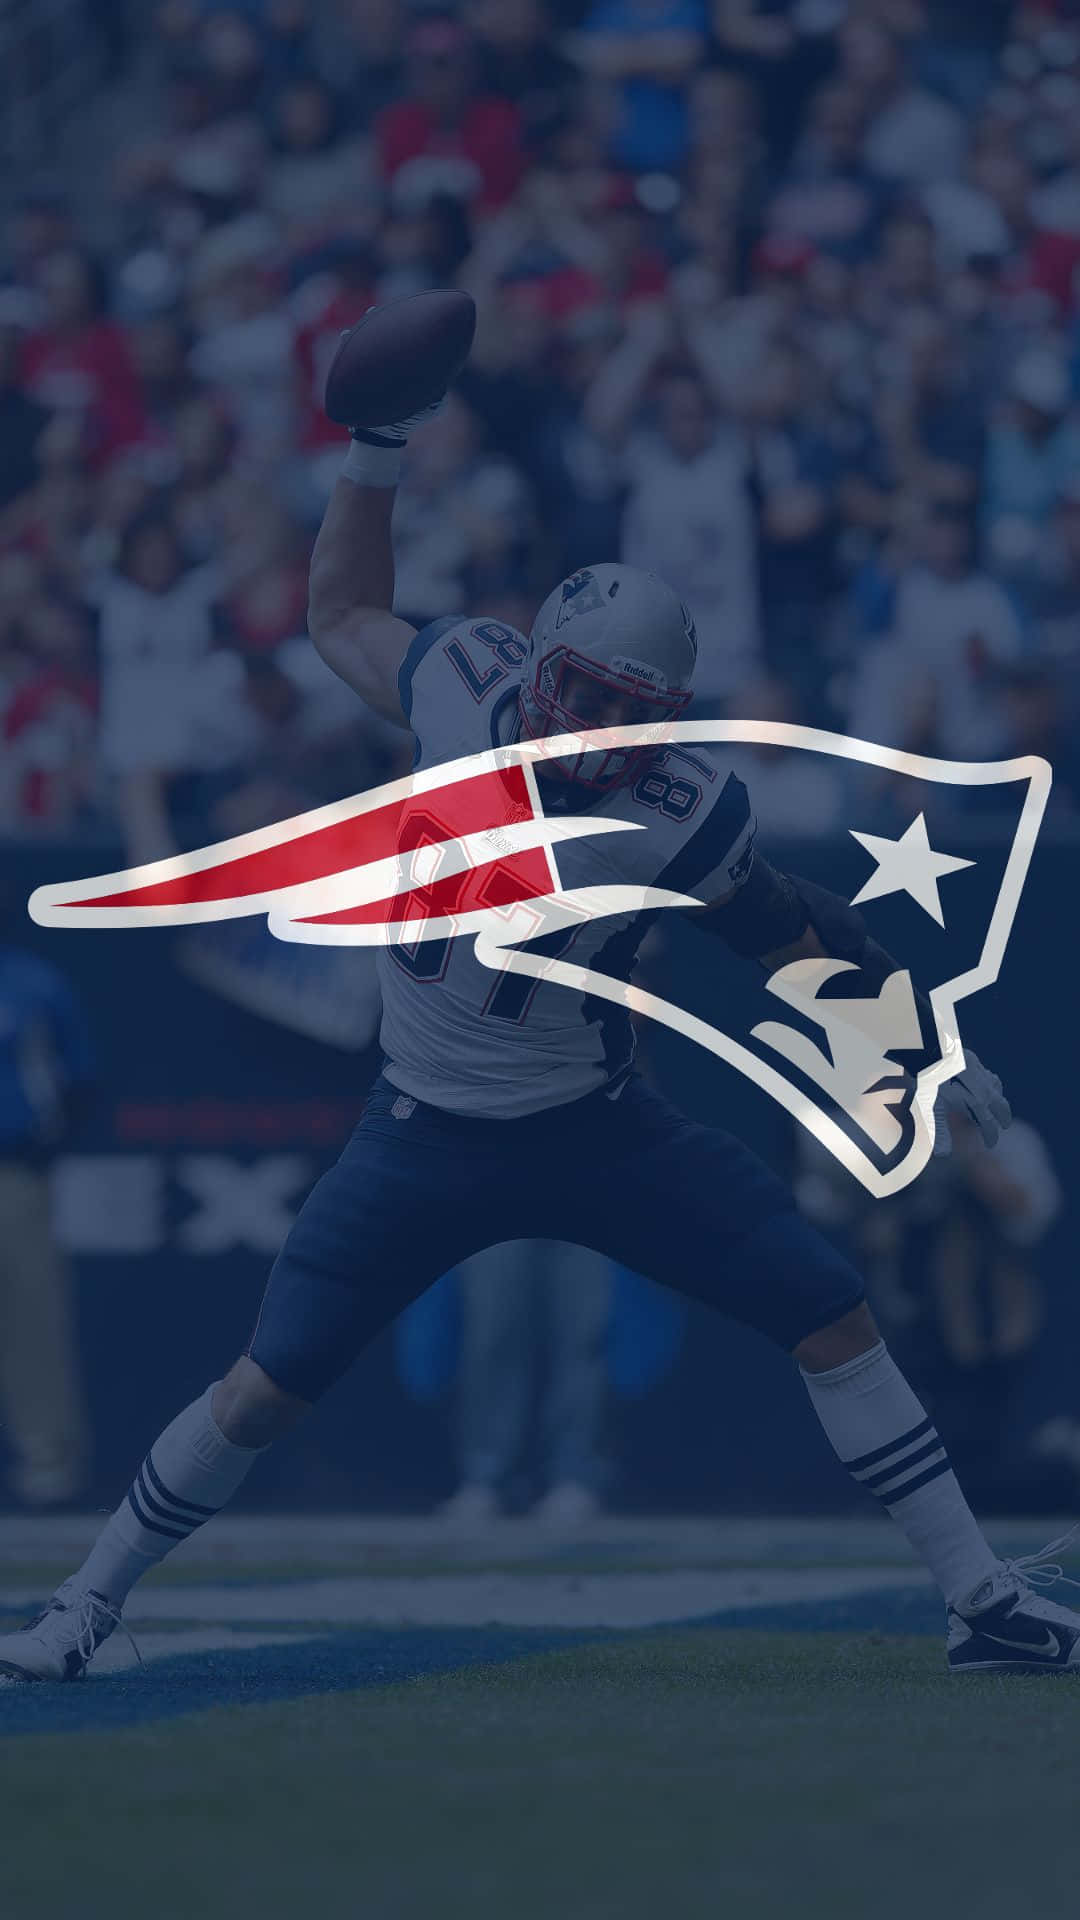 A Powerful Display Of New England Patriots Pride With The Team Logo Highlighted Against An Abstract Background.